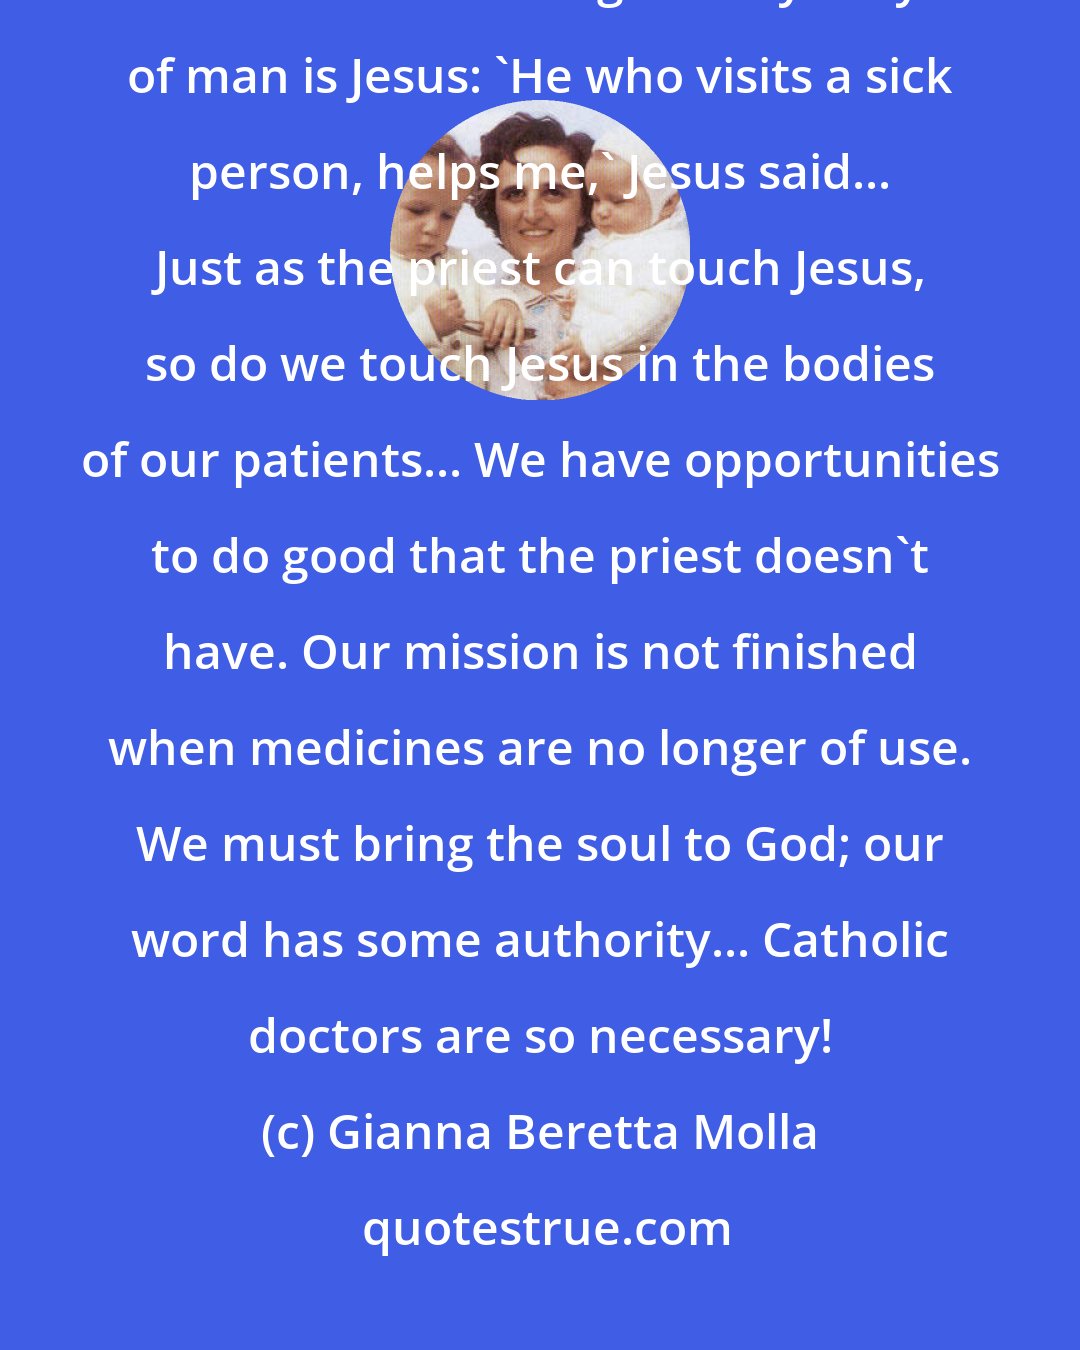 Gianna Beretta Molla: Everyone works in the service of man. We doctors work directly on man himself... The great mystery of man is Jesus: 'He who visits a sick person, helps me,' Jesus said... Just as the priest can touch Jesus, so do we touch Jesus in the bodies of our patients... We have opportunities to do good that the priest doesn't have. Our mission is not finished when medicines are no longer of use. We must bring the soul to God; our word has some authority... Catholic doctors are so necessary!